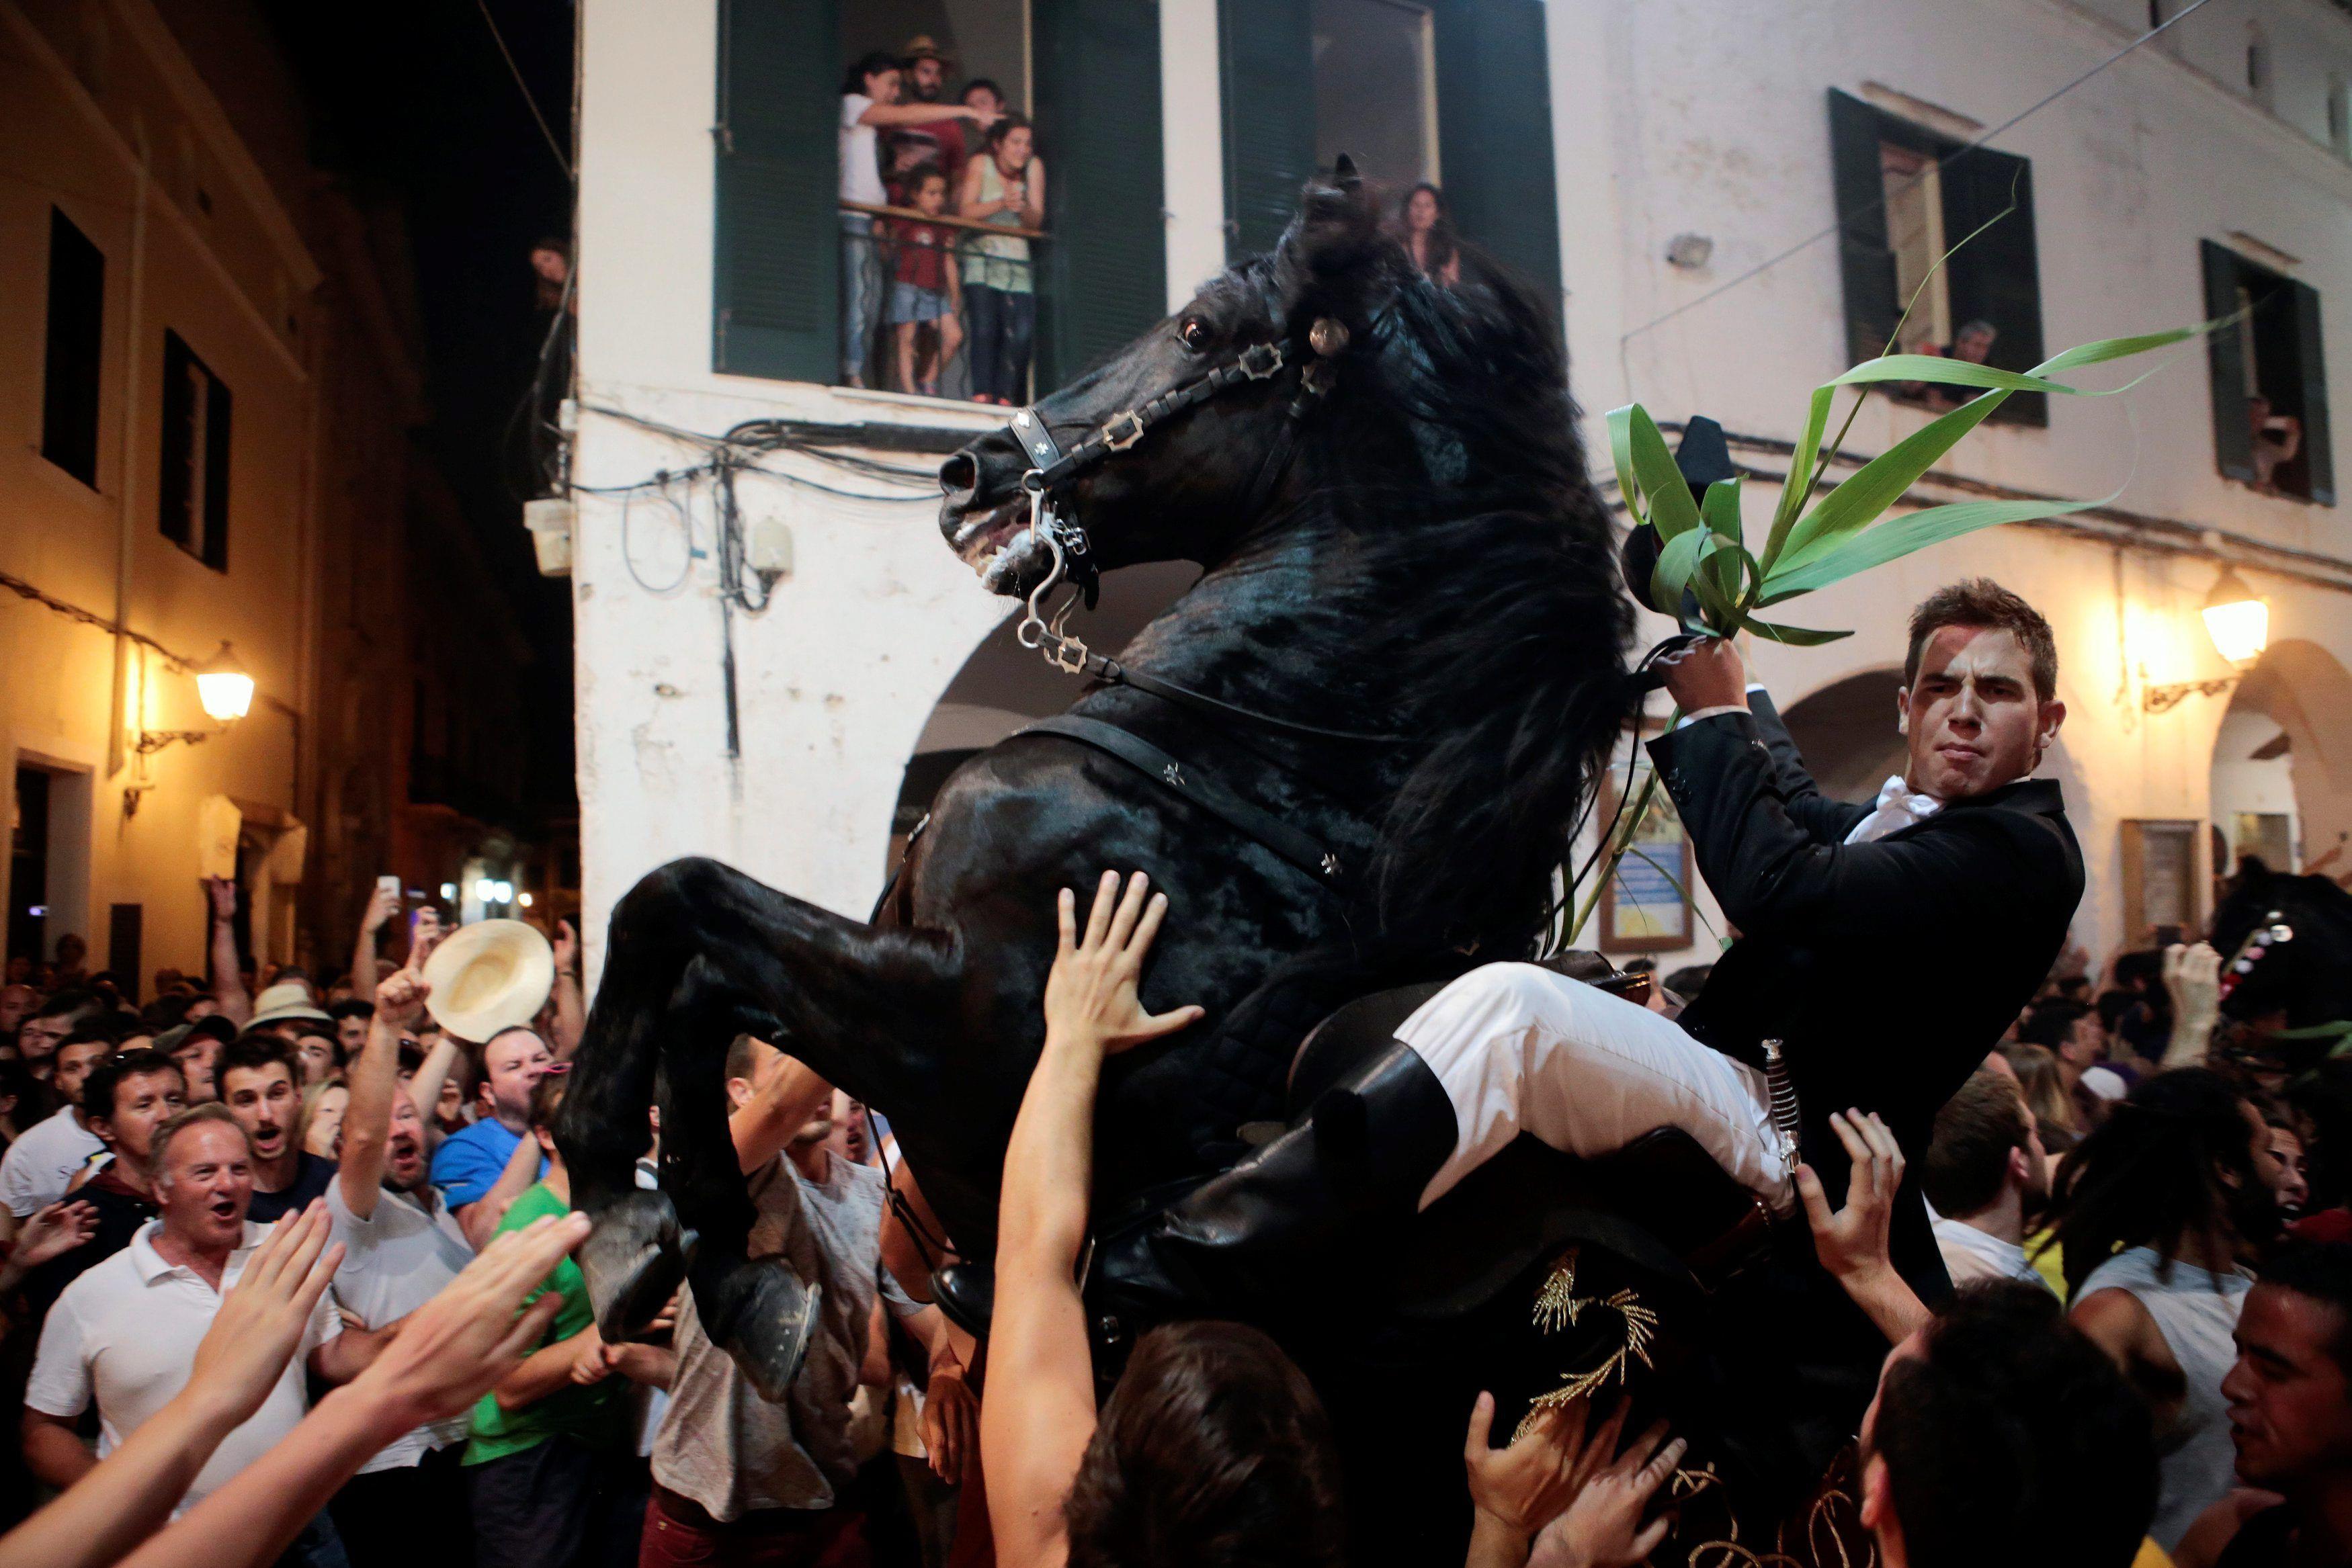 A rider rears up on his horse during the Sant Joan festivities in Ciutadella on the island of Menorc